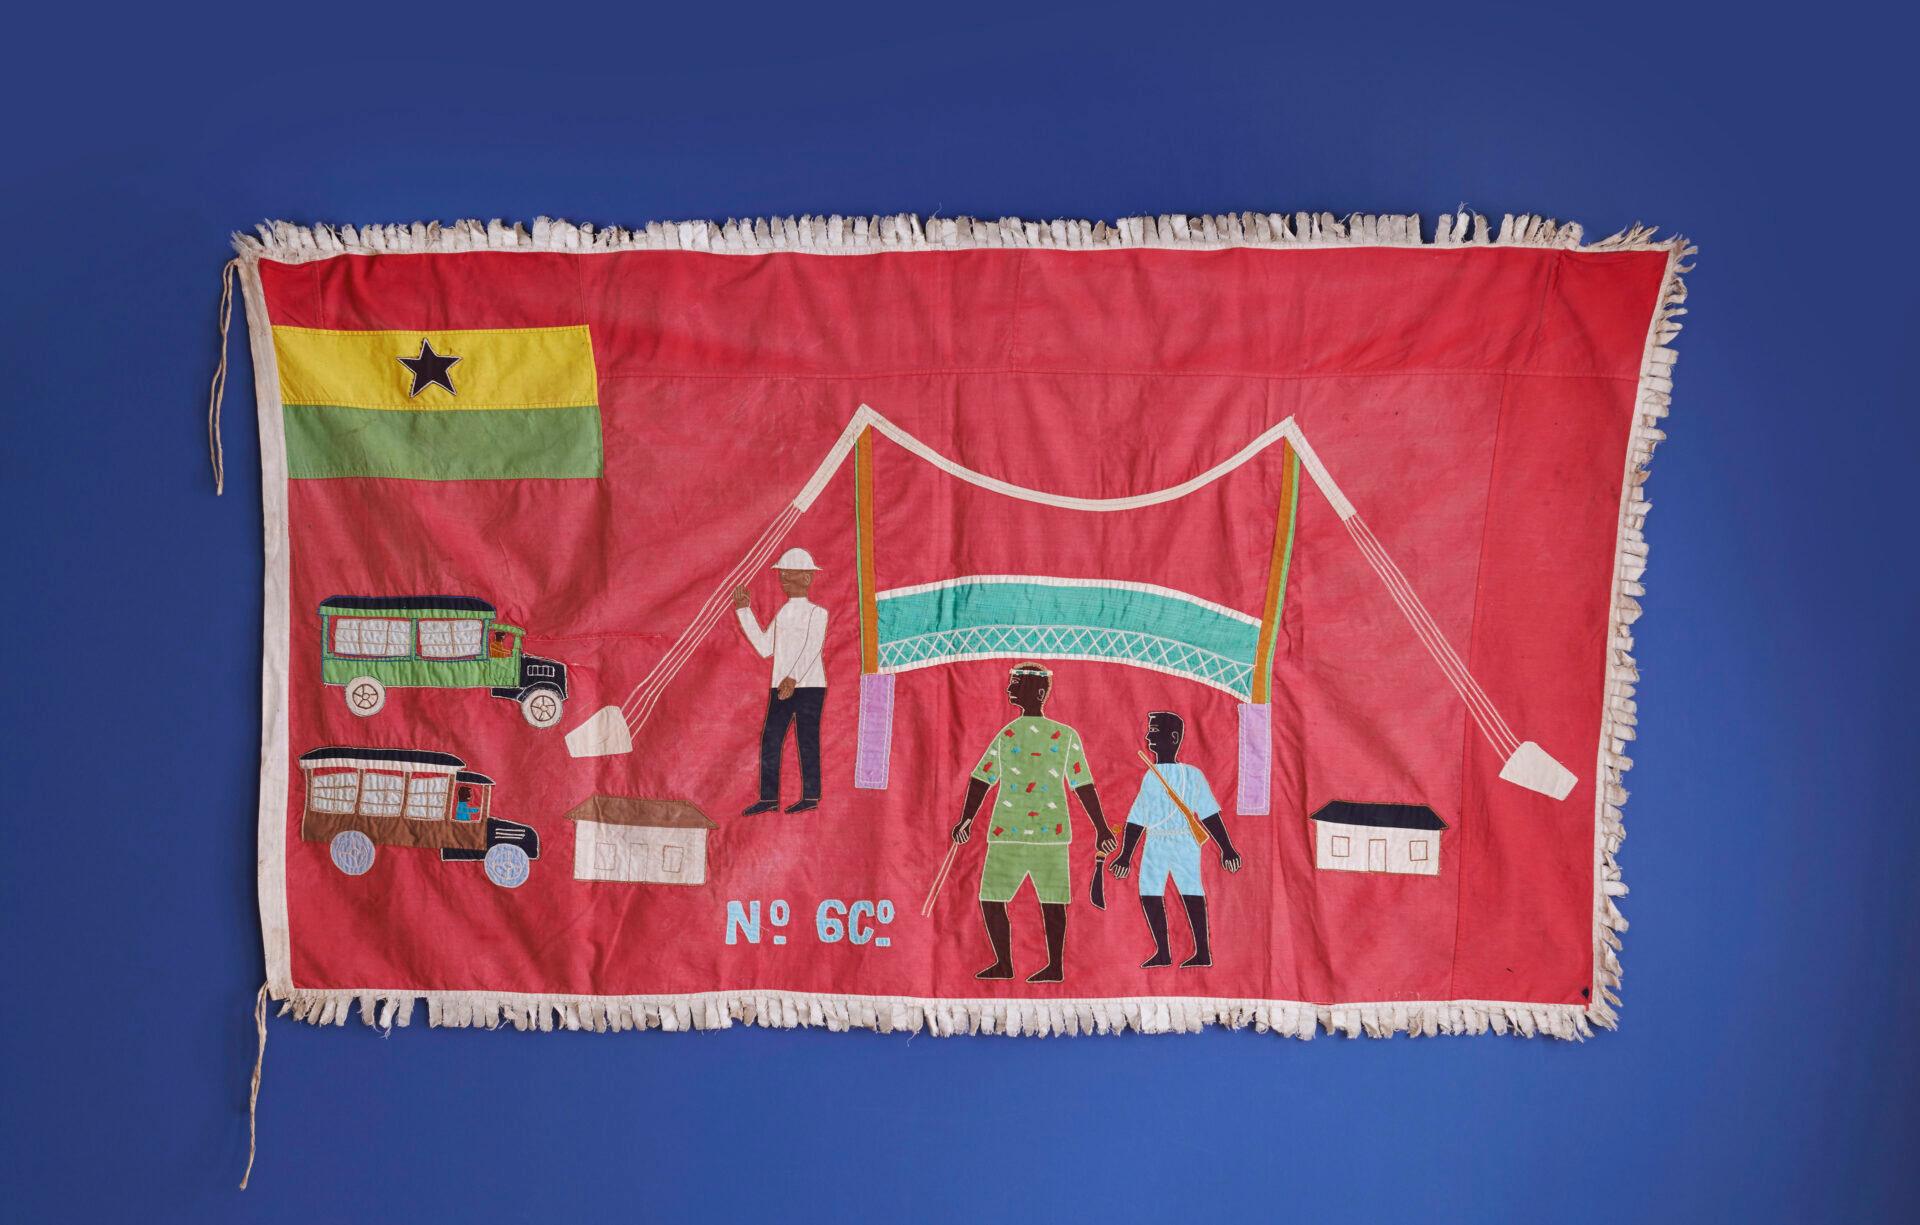 Kwamina Amoaku
Ghana, 1960s

Asafo flag in cotton applique patterns. Fante People.

Asafo Flags are created by the Fante people of Ghana. The flags are visual representations of military organisations in Fante communities known as “Asafo”. The